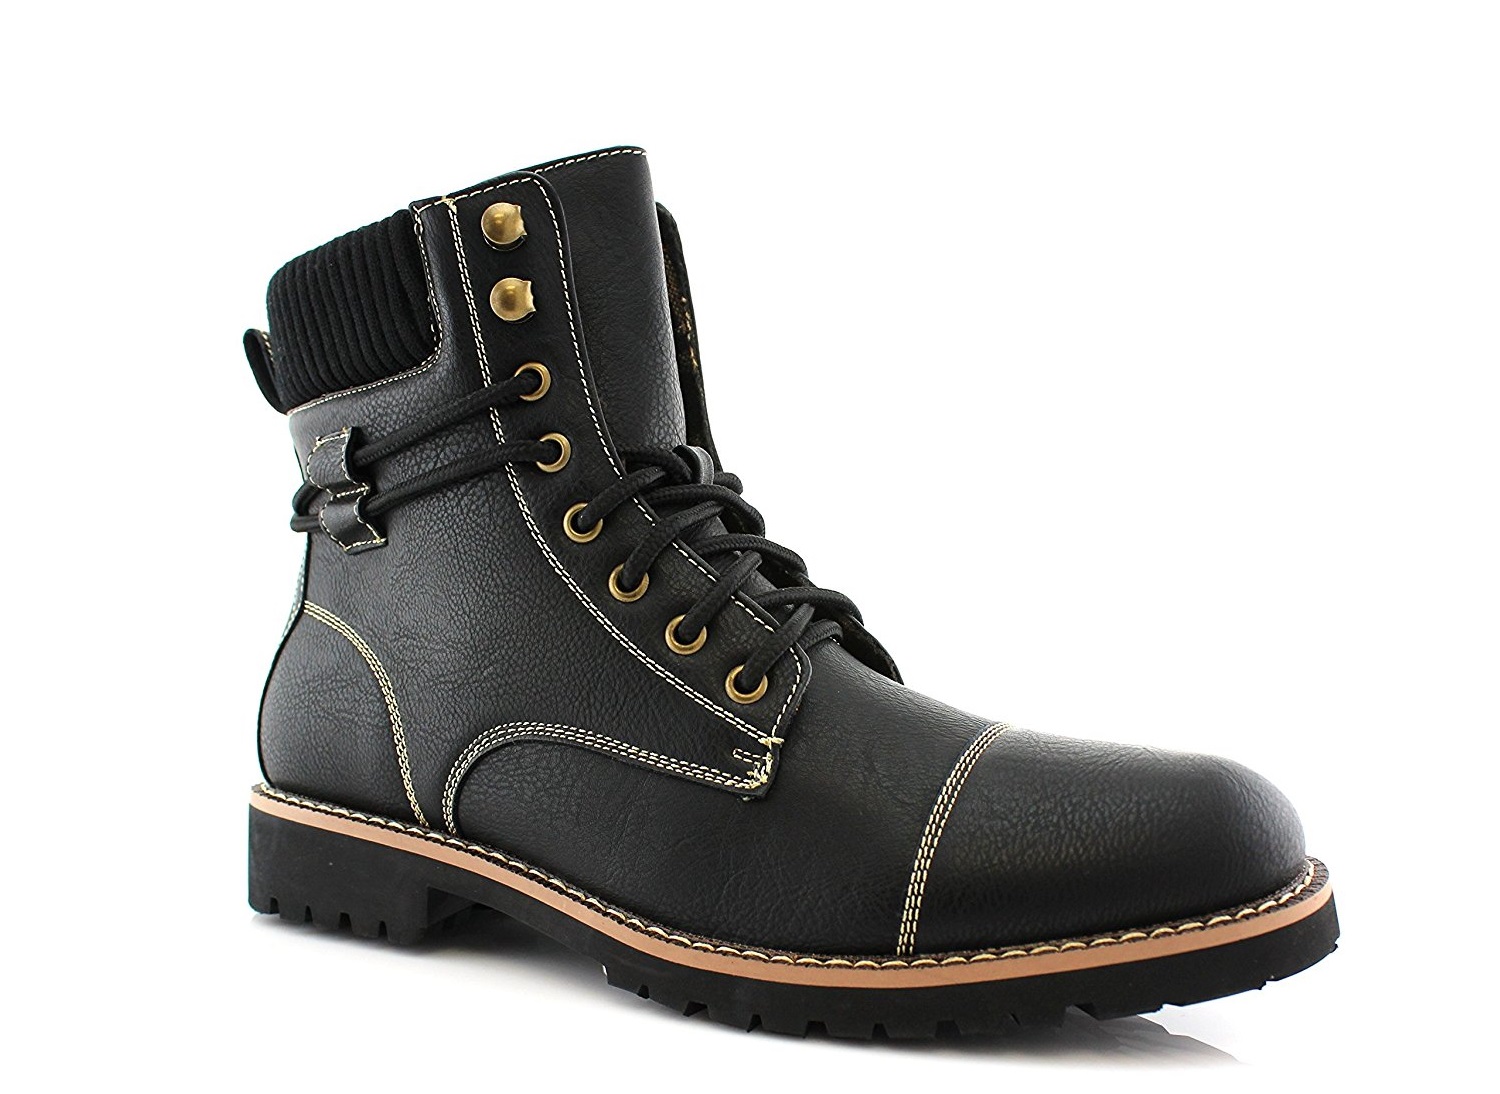 Polar NICHOLAS Men's Boots For Work or Casual Wear